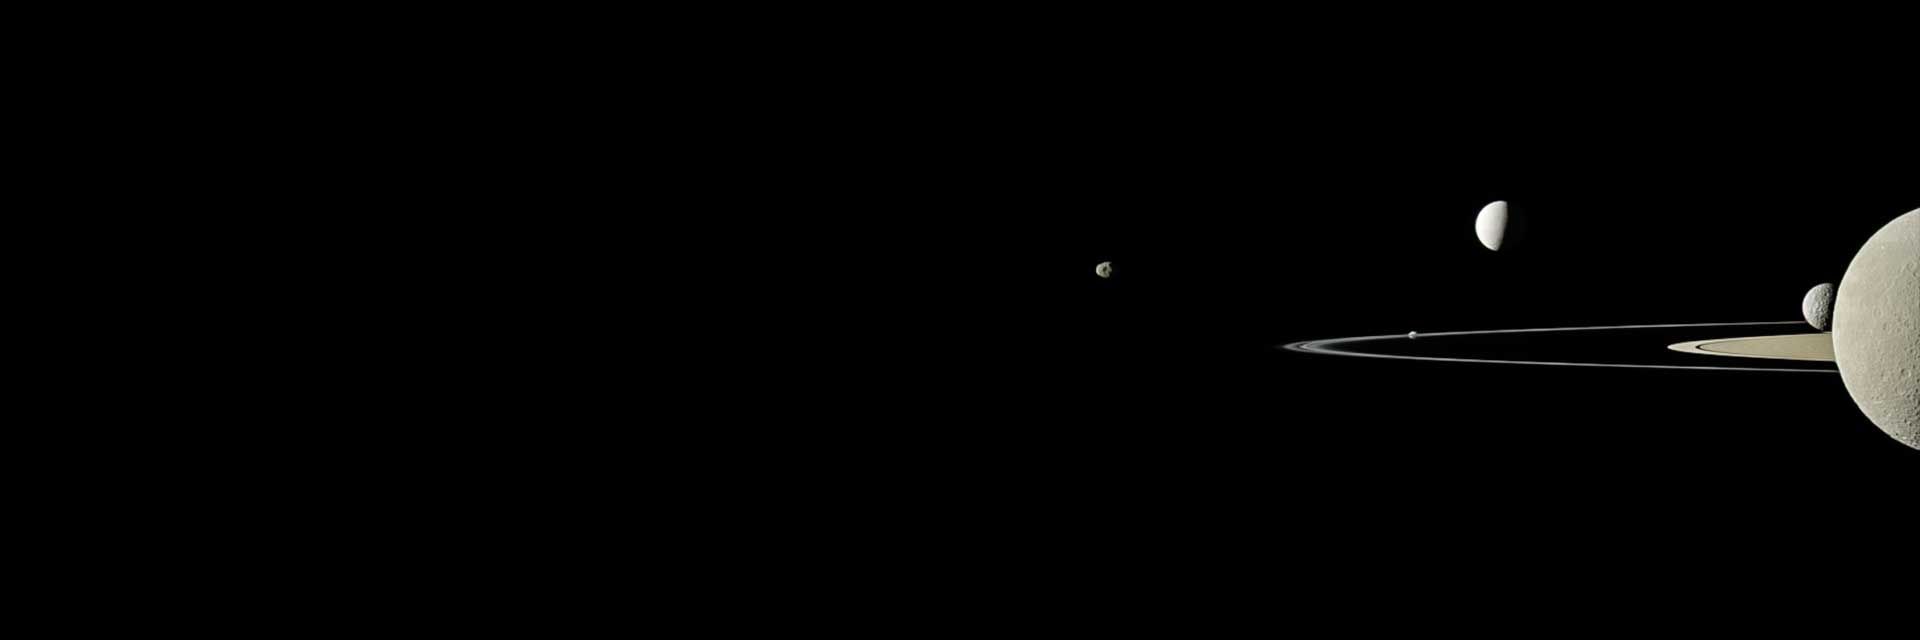 Saturn, some of its rings and five moons against the darkness of space